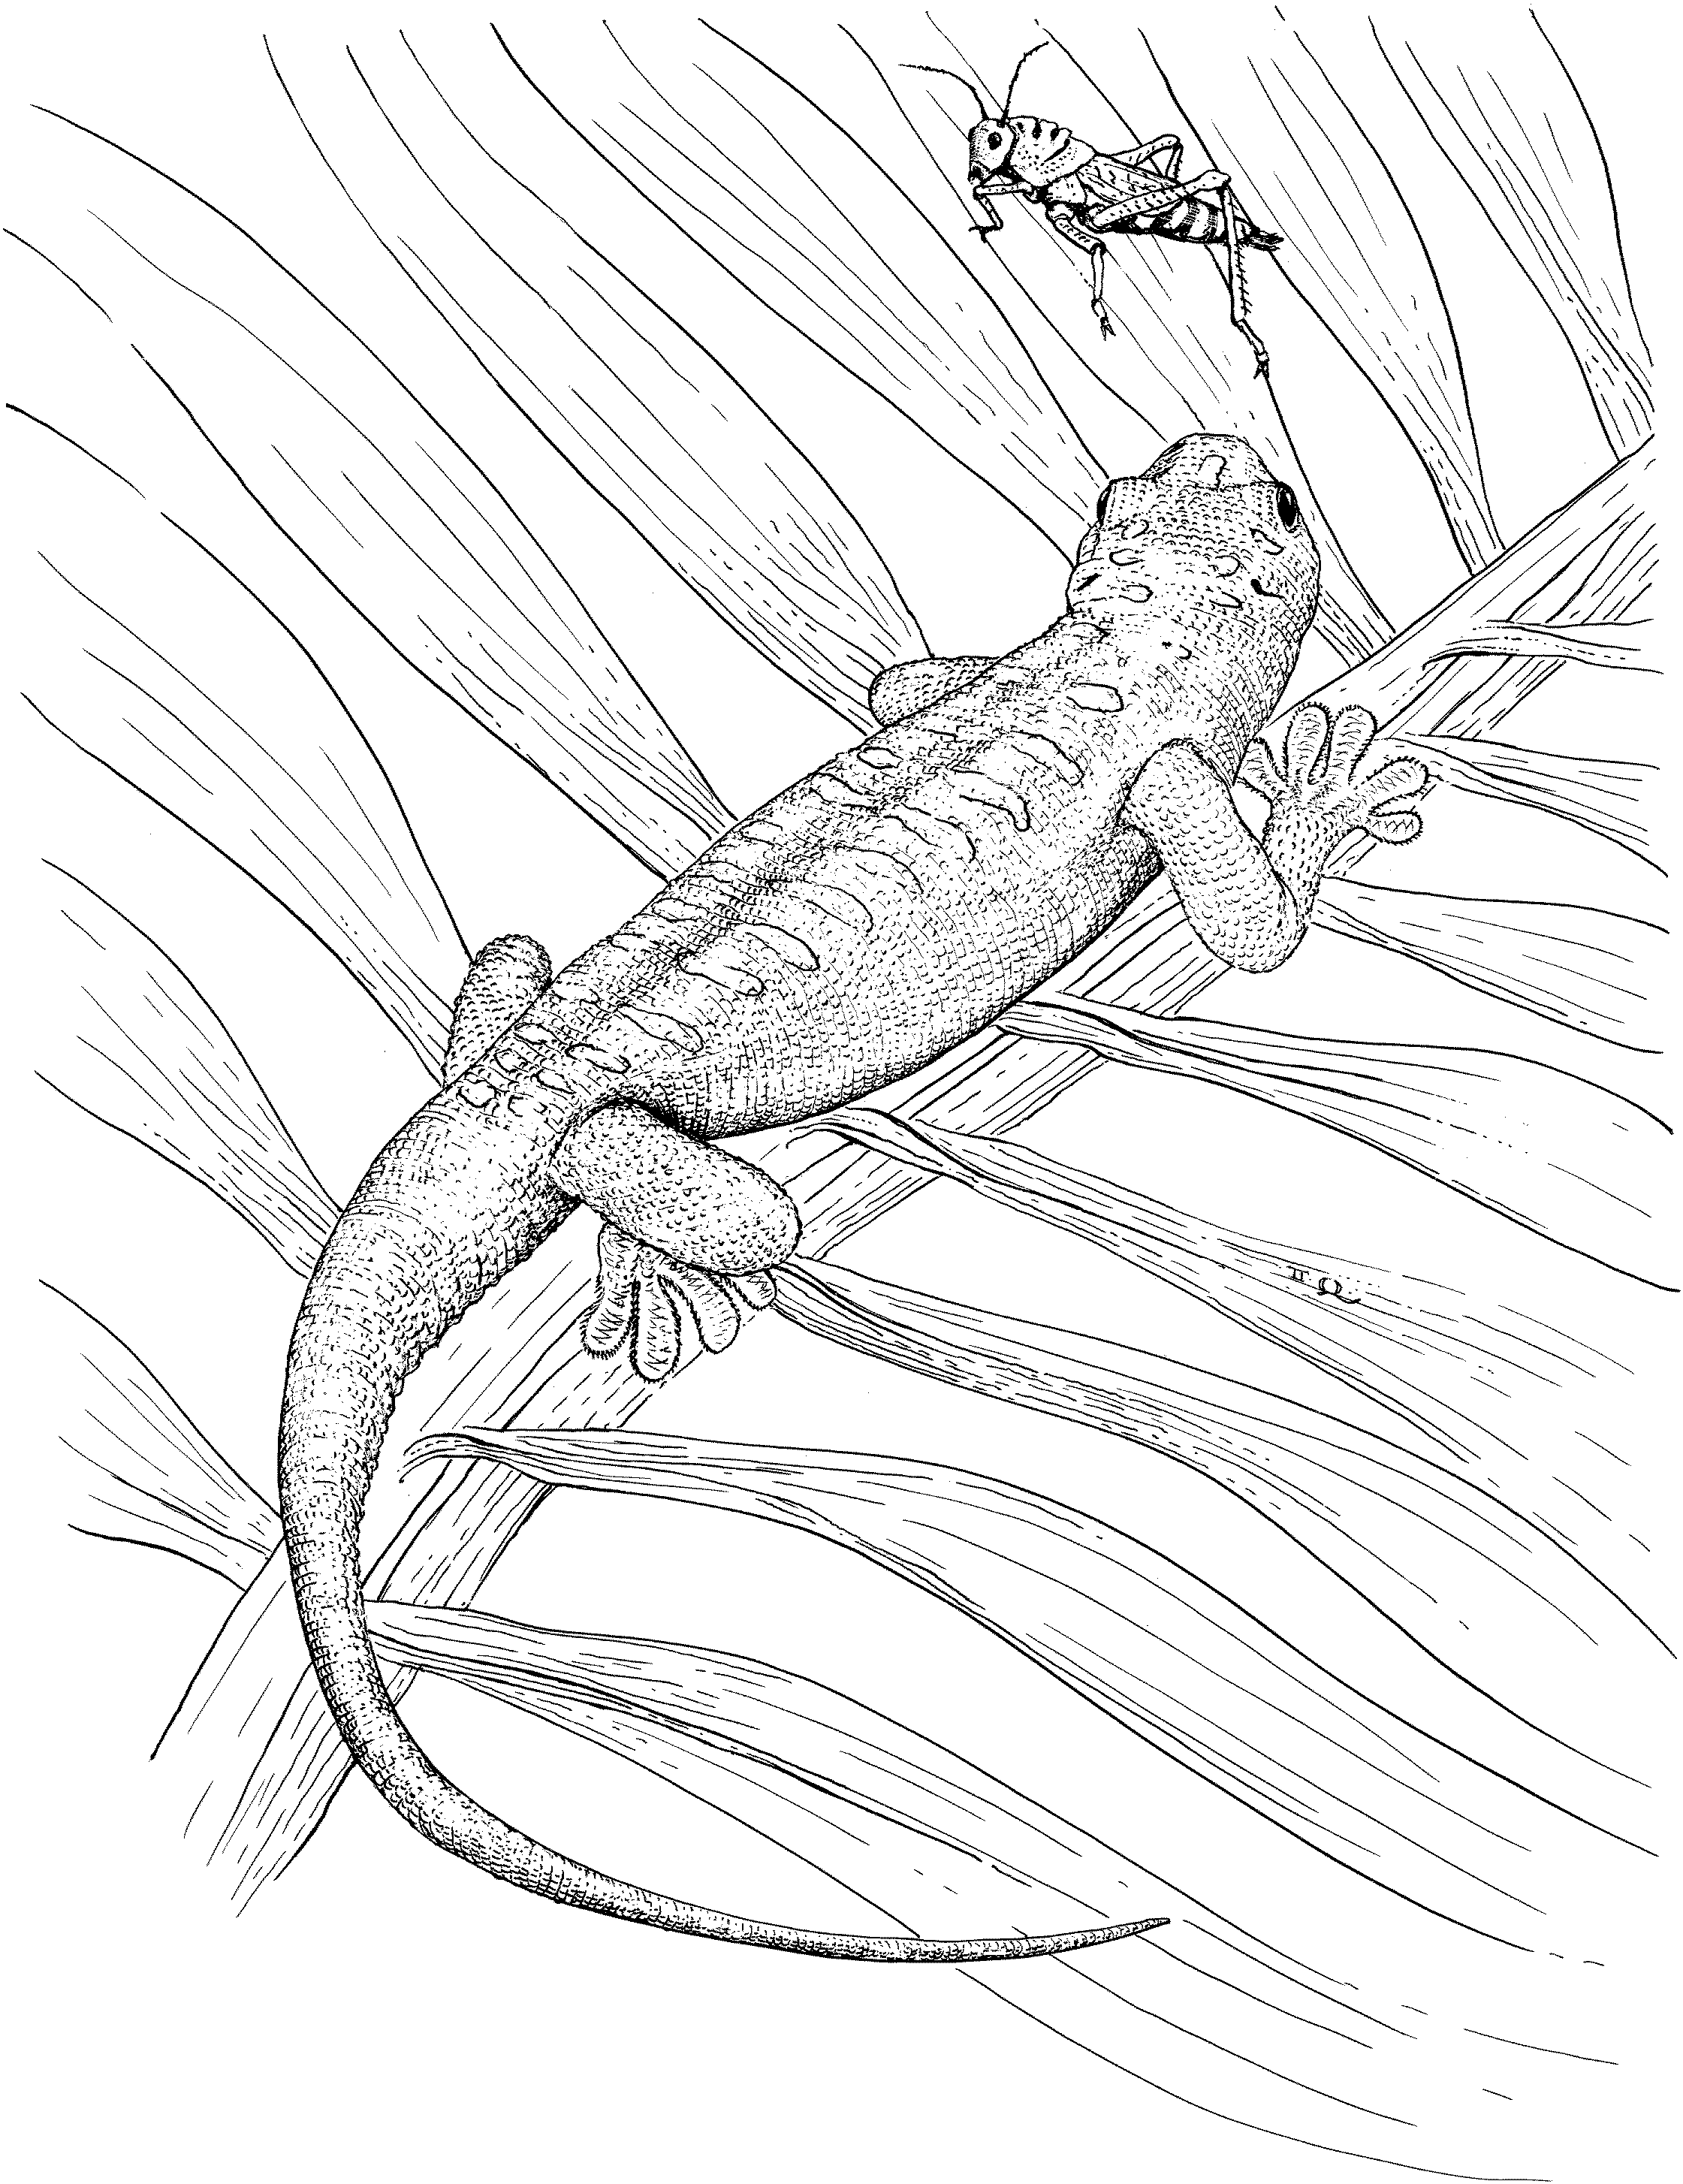 Lizard Pictures To Print / Free Printable Lizard Coloring Pages For Kids